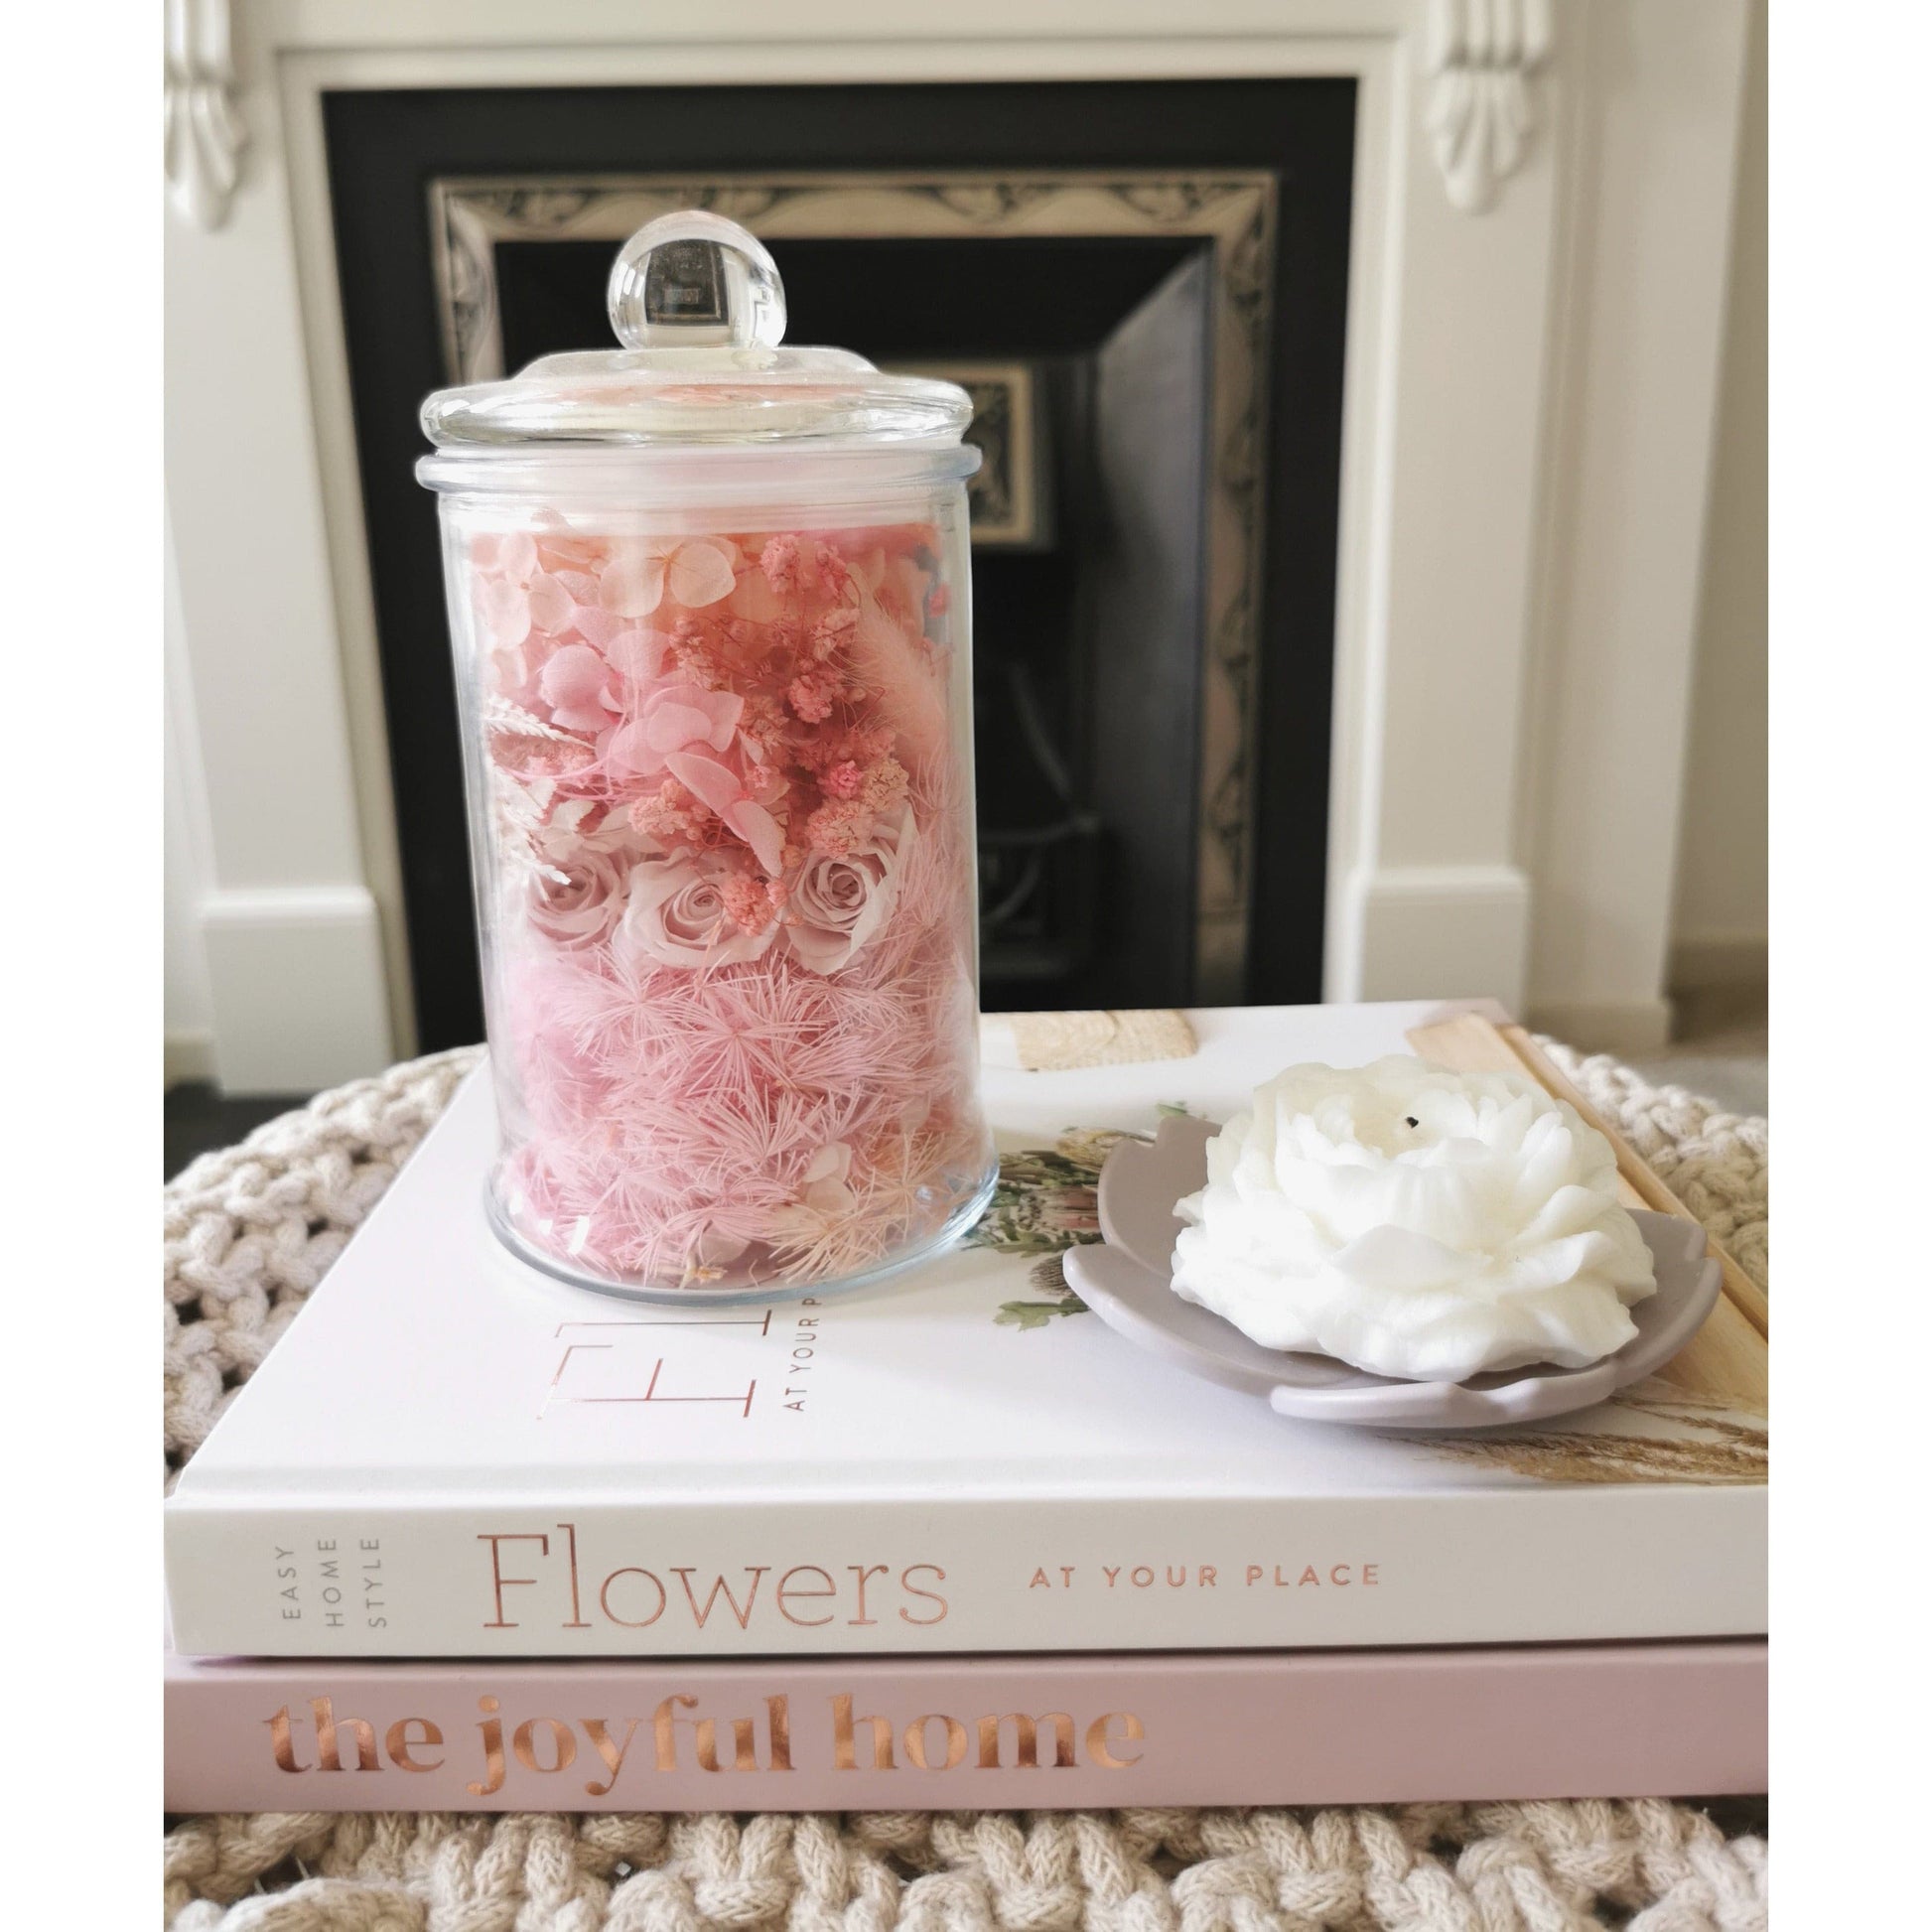 Dried and preserved flower offcuts known as flower confetti in a clear glass jar with lid